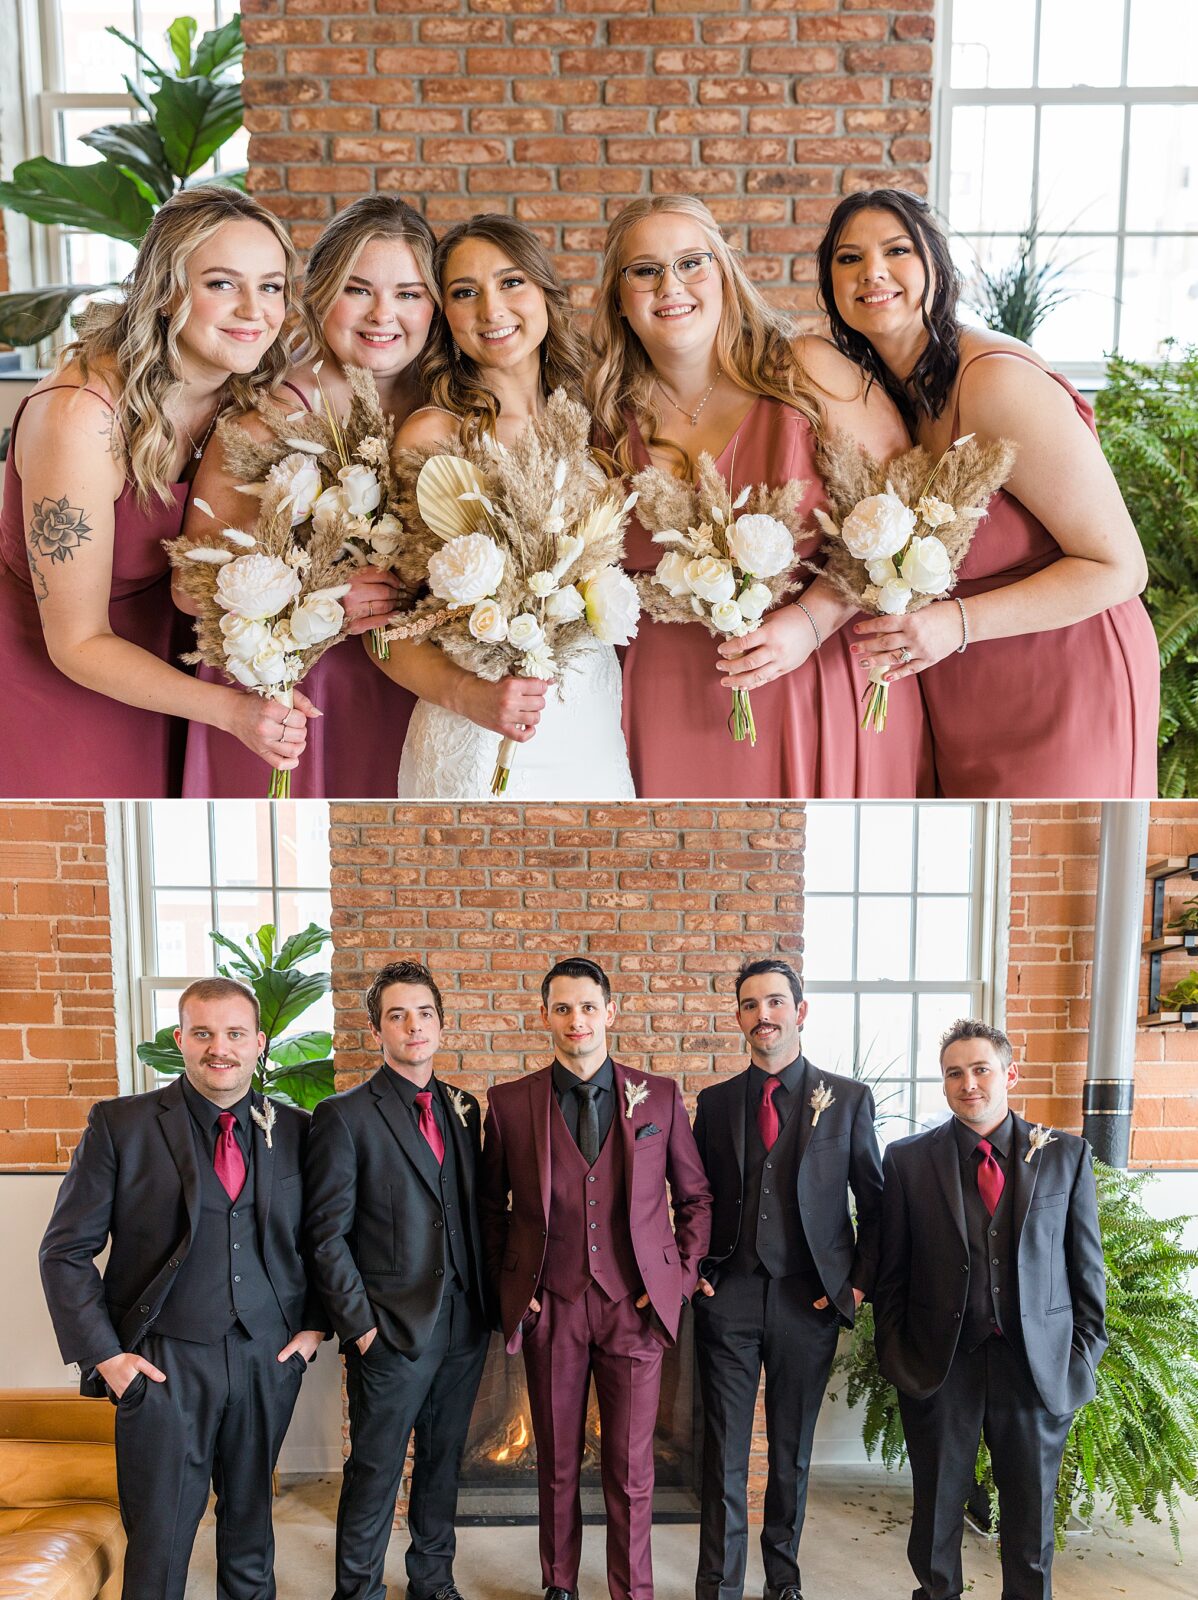 Wedding Party and Bride and Groom photos at The Every Day Kitchen in Regina, Sask